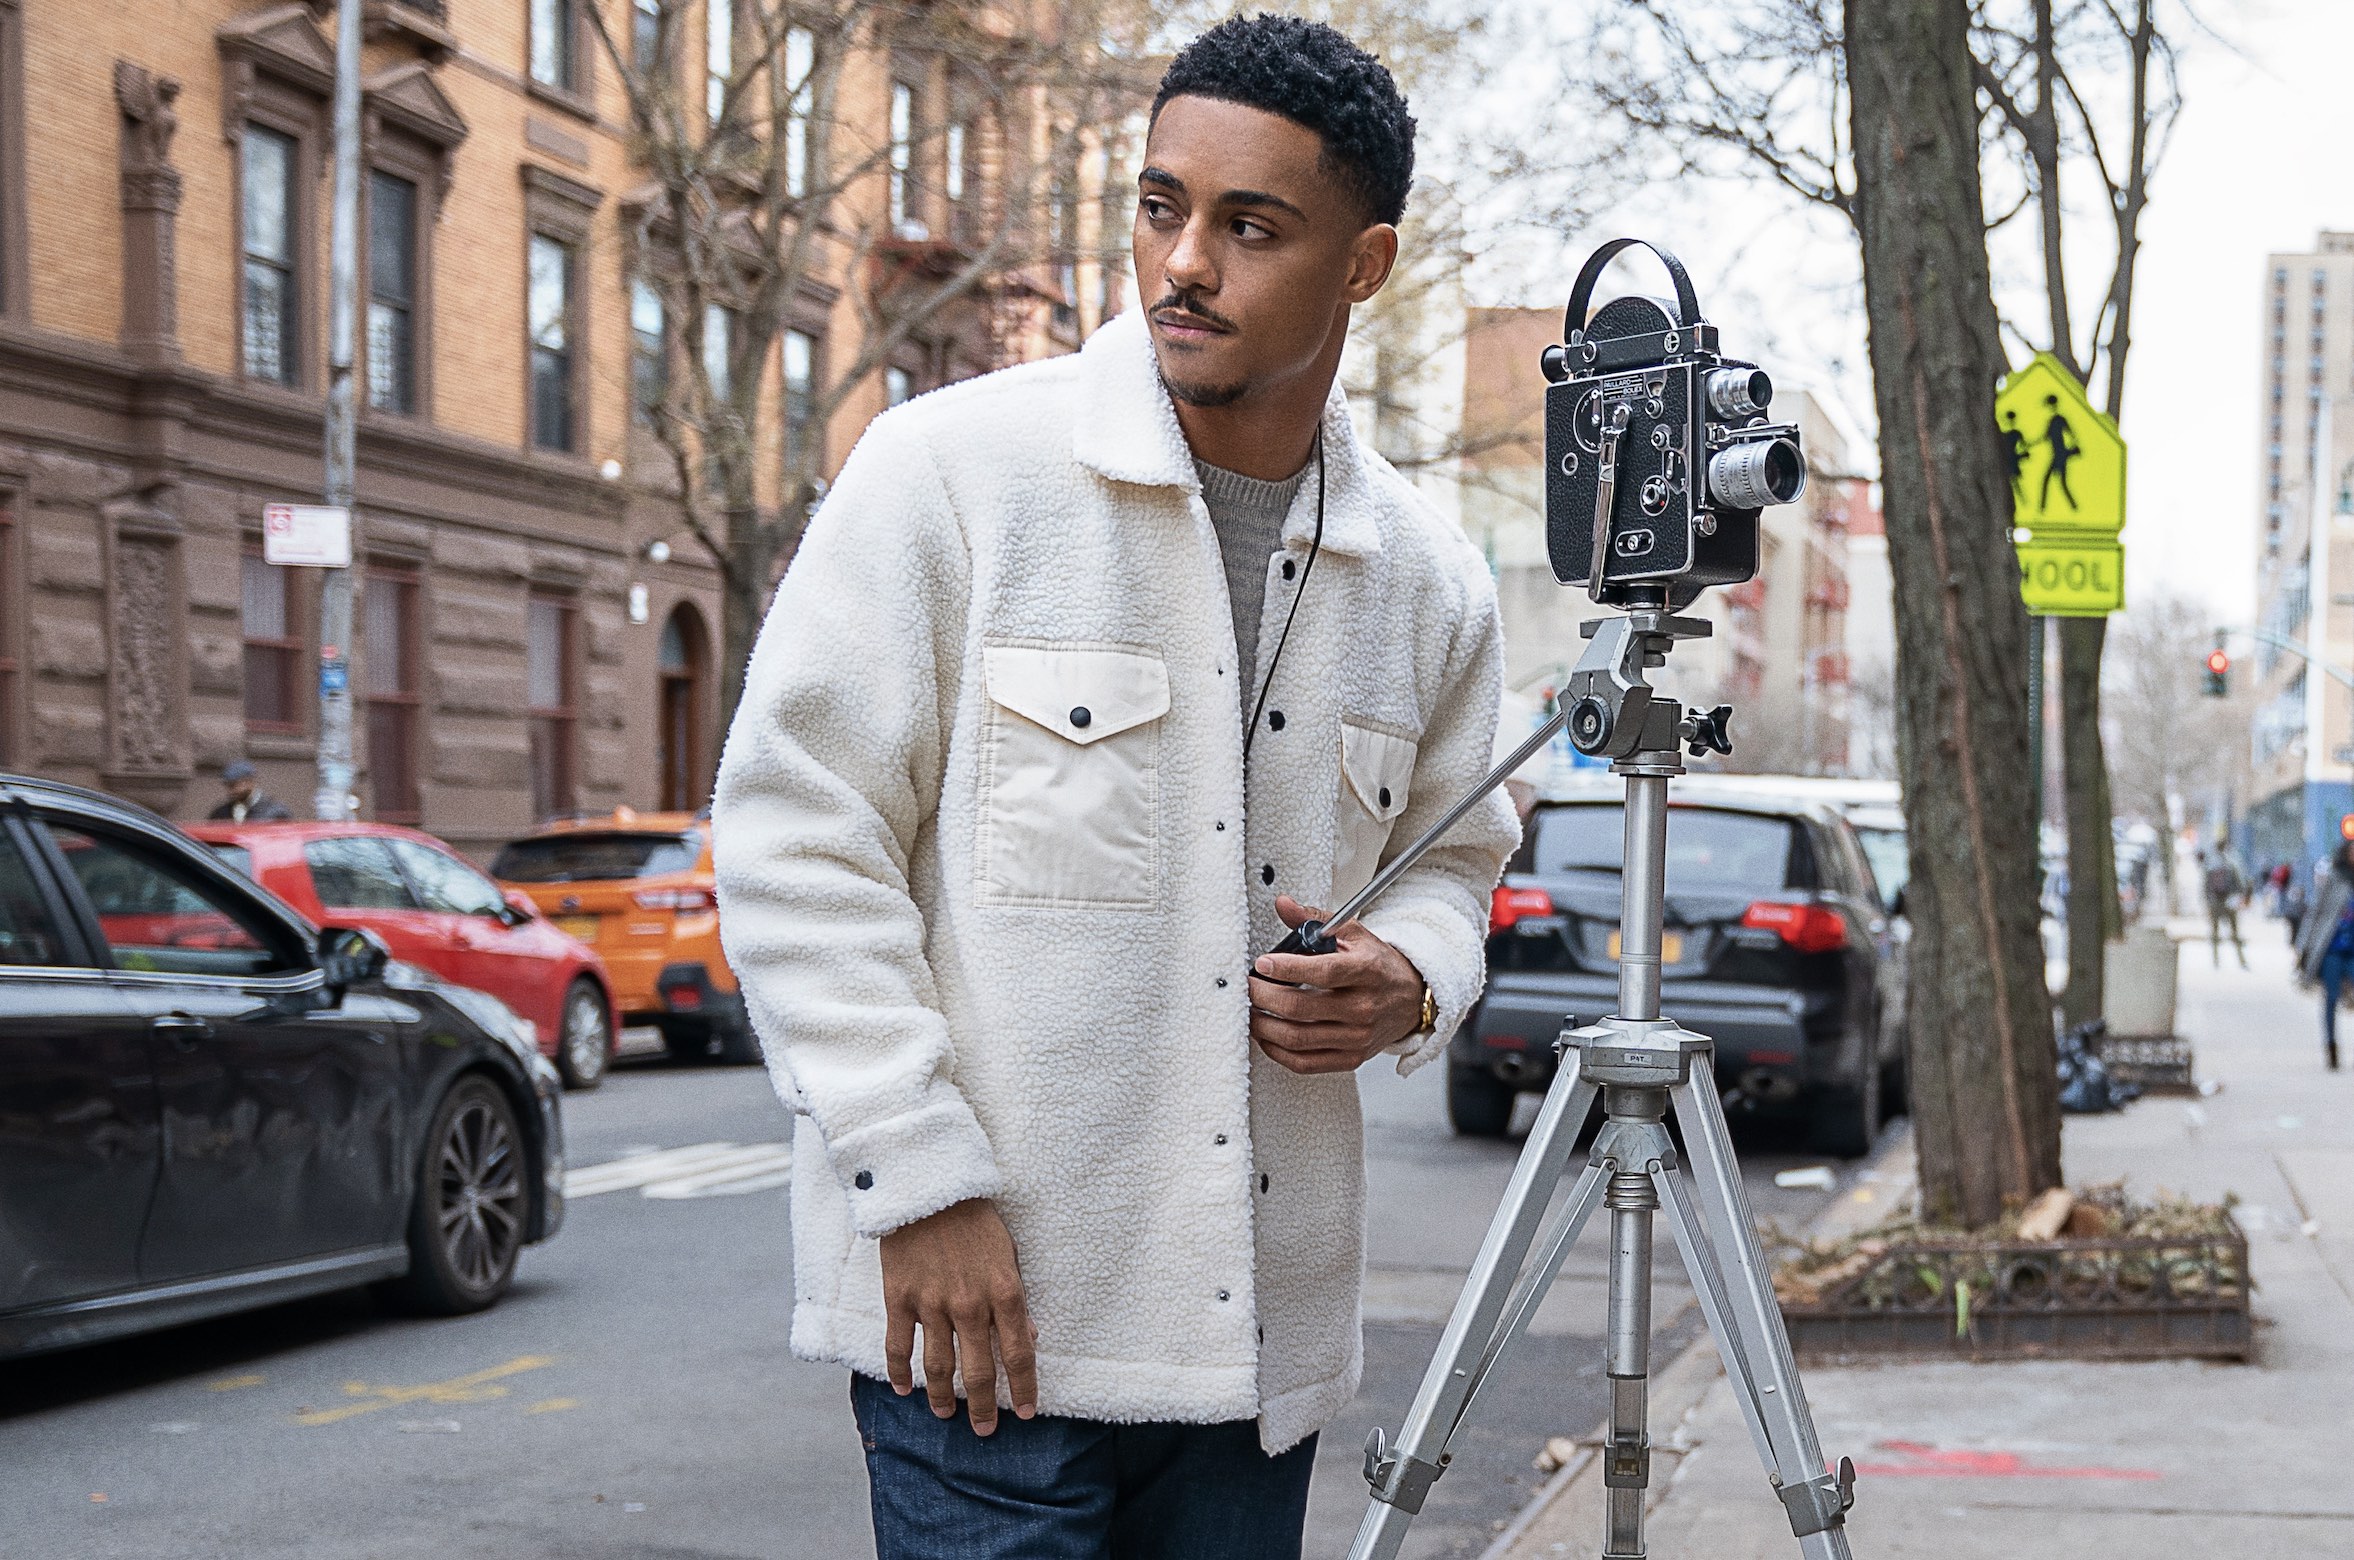 The Perfect Find Cast on Netflix - Keith Powers as Eric